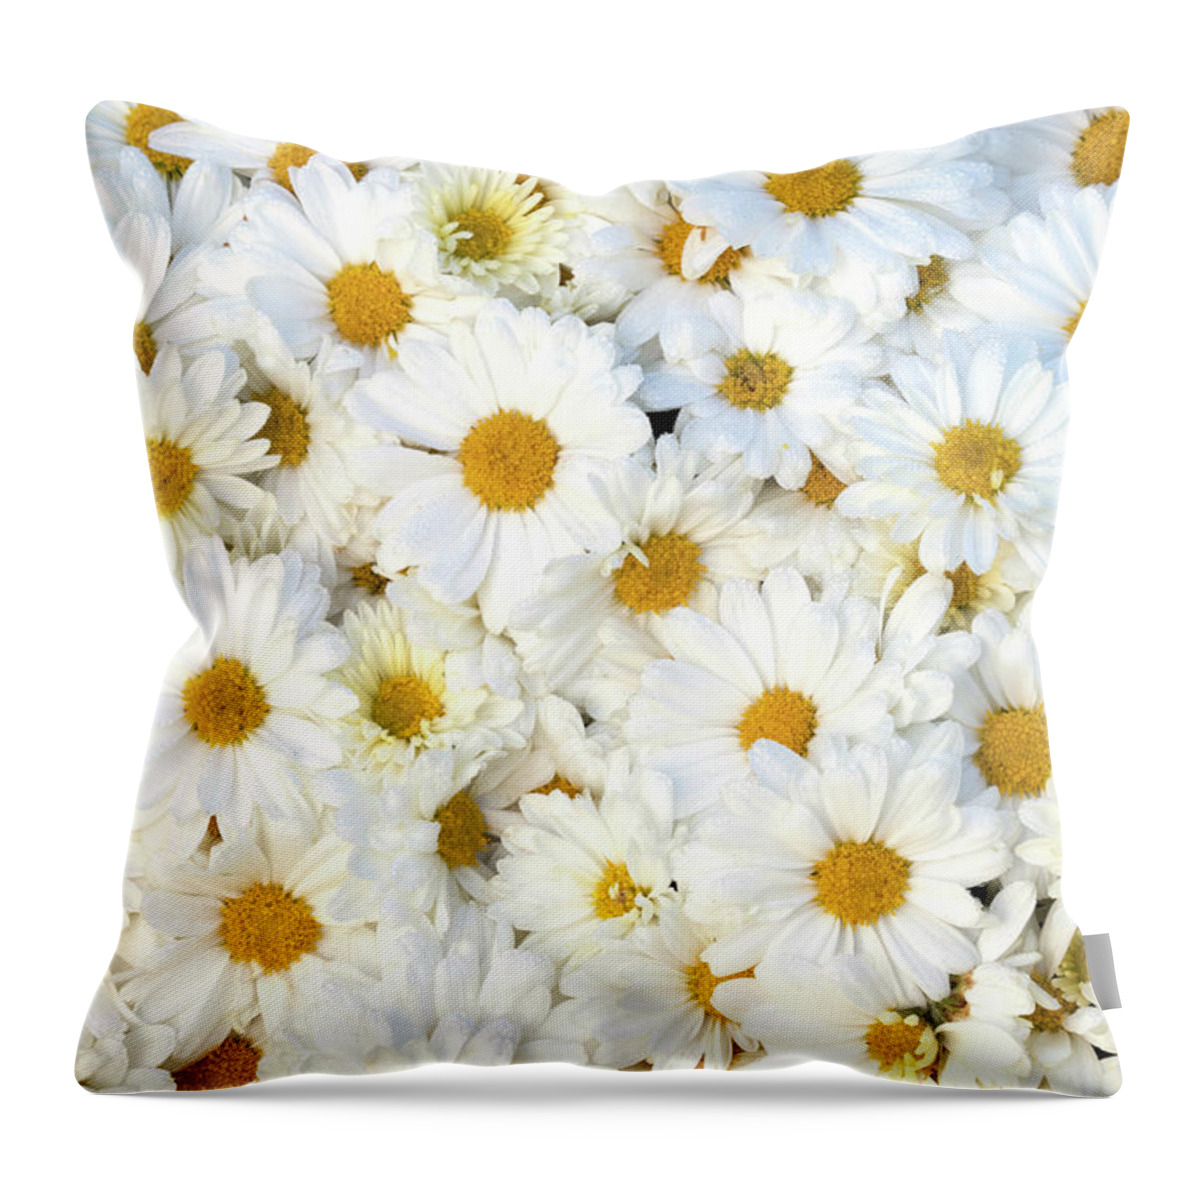 So Many Daisies Throw Pillow featuring the photograph So Many Daisies by Patty Colabuono